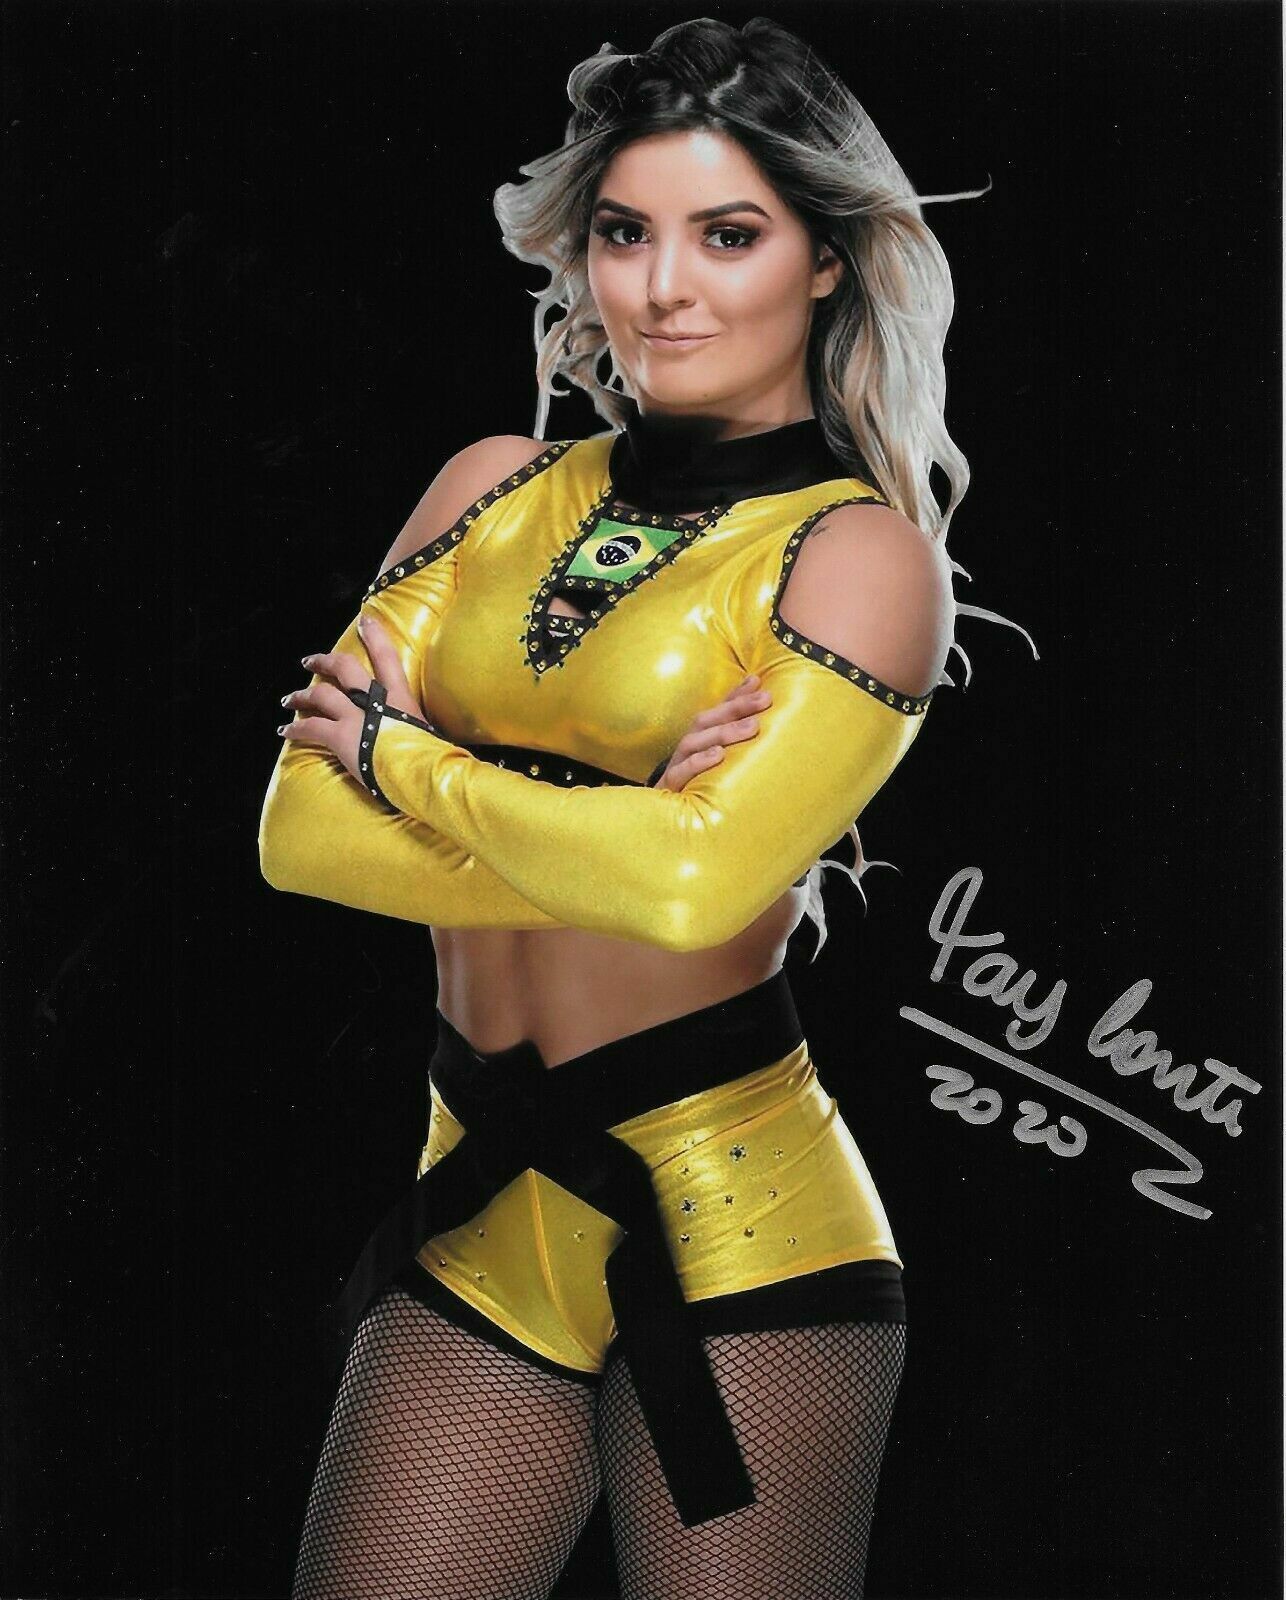 Tay Conti ( WWF WWE ) Autographed Signed 8x10 Photo Poster painting REPRINT ,